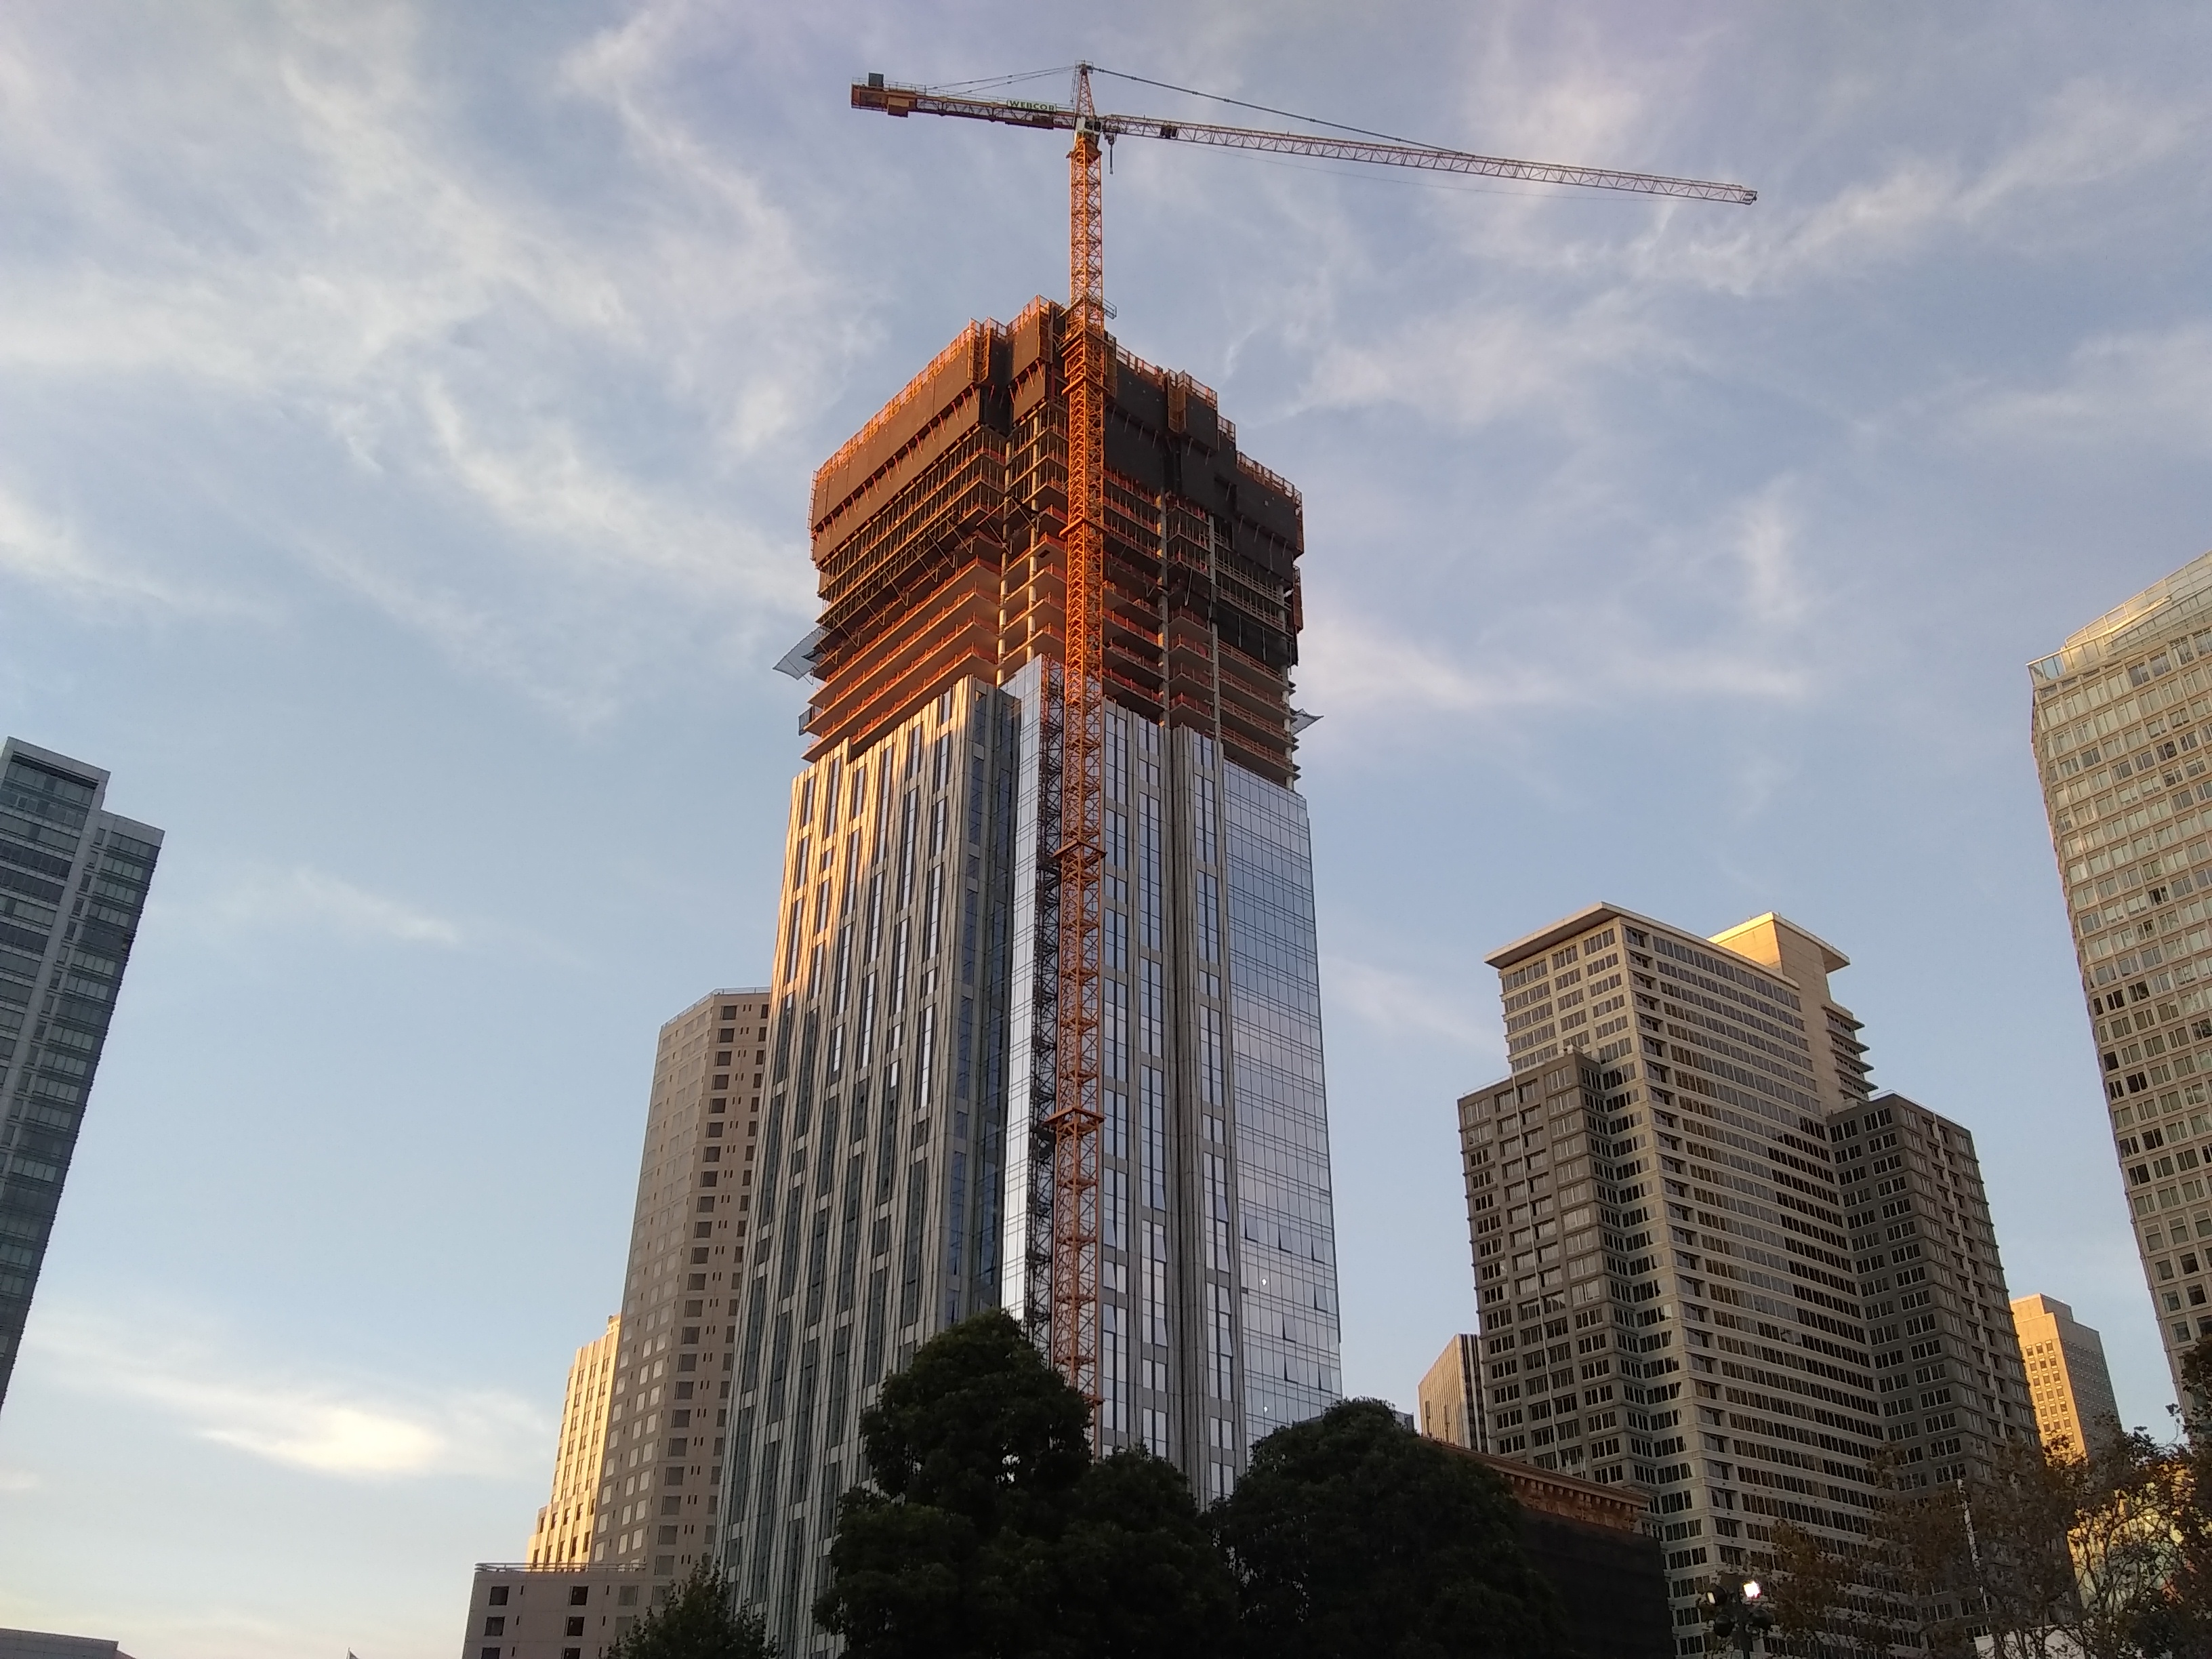 A construction crane perched on top of a partially built skyscraper, with glass installed on the bottom two-thirds of the facade.